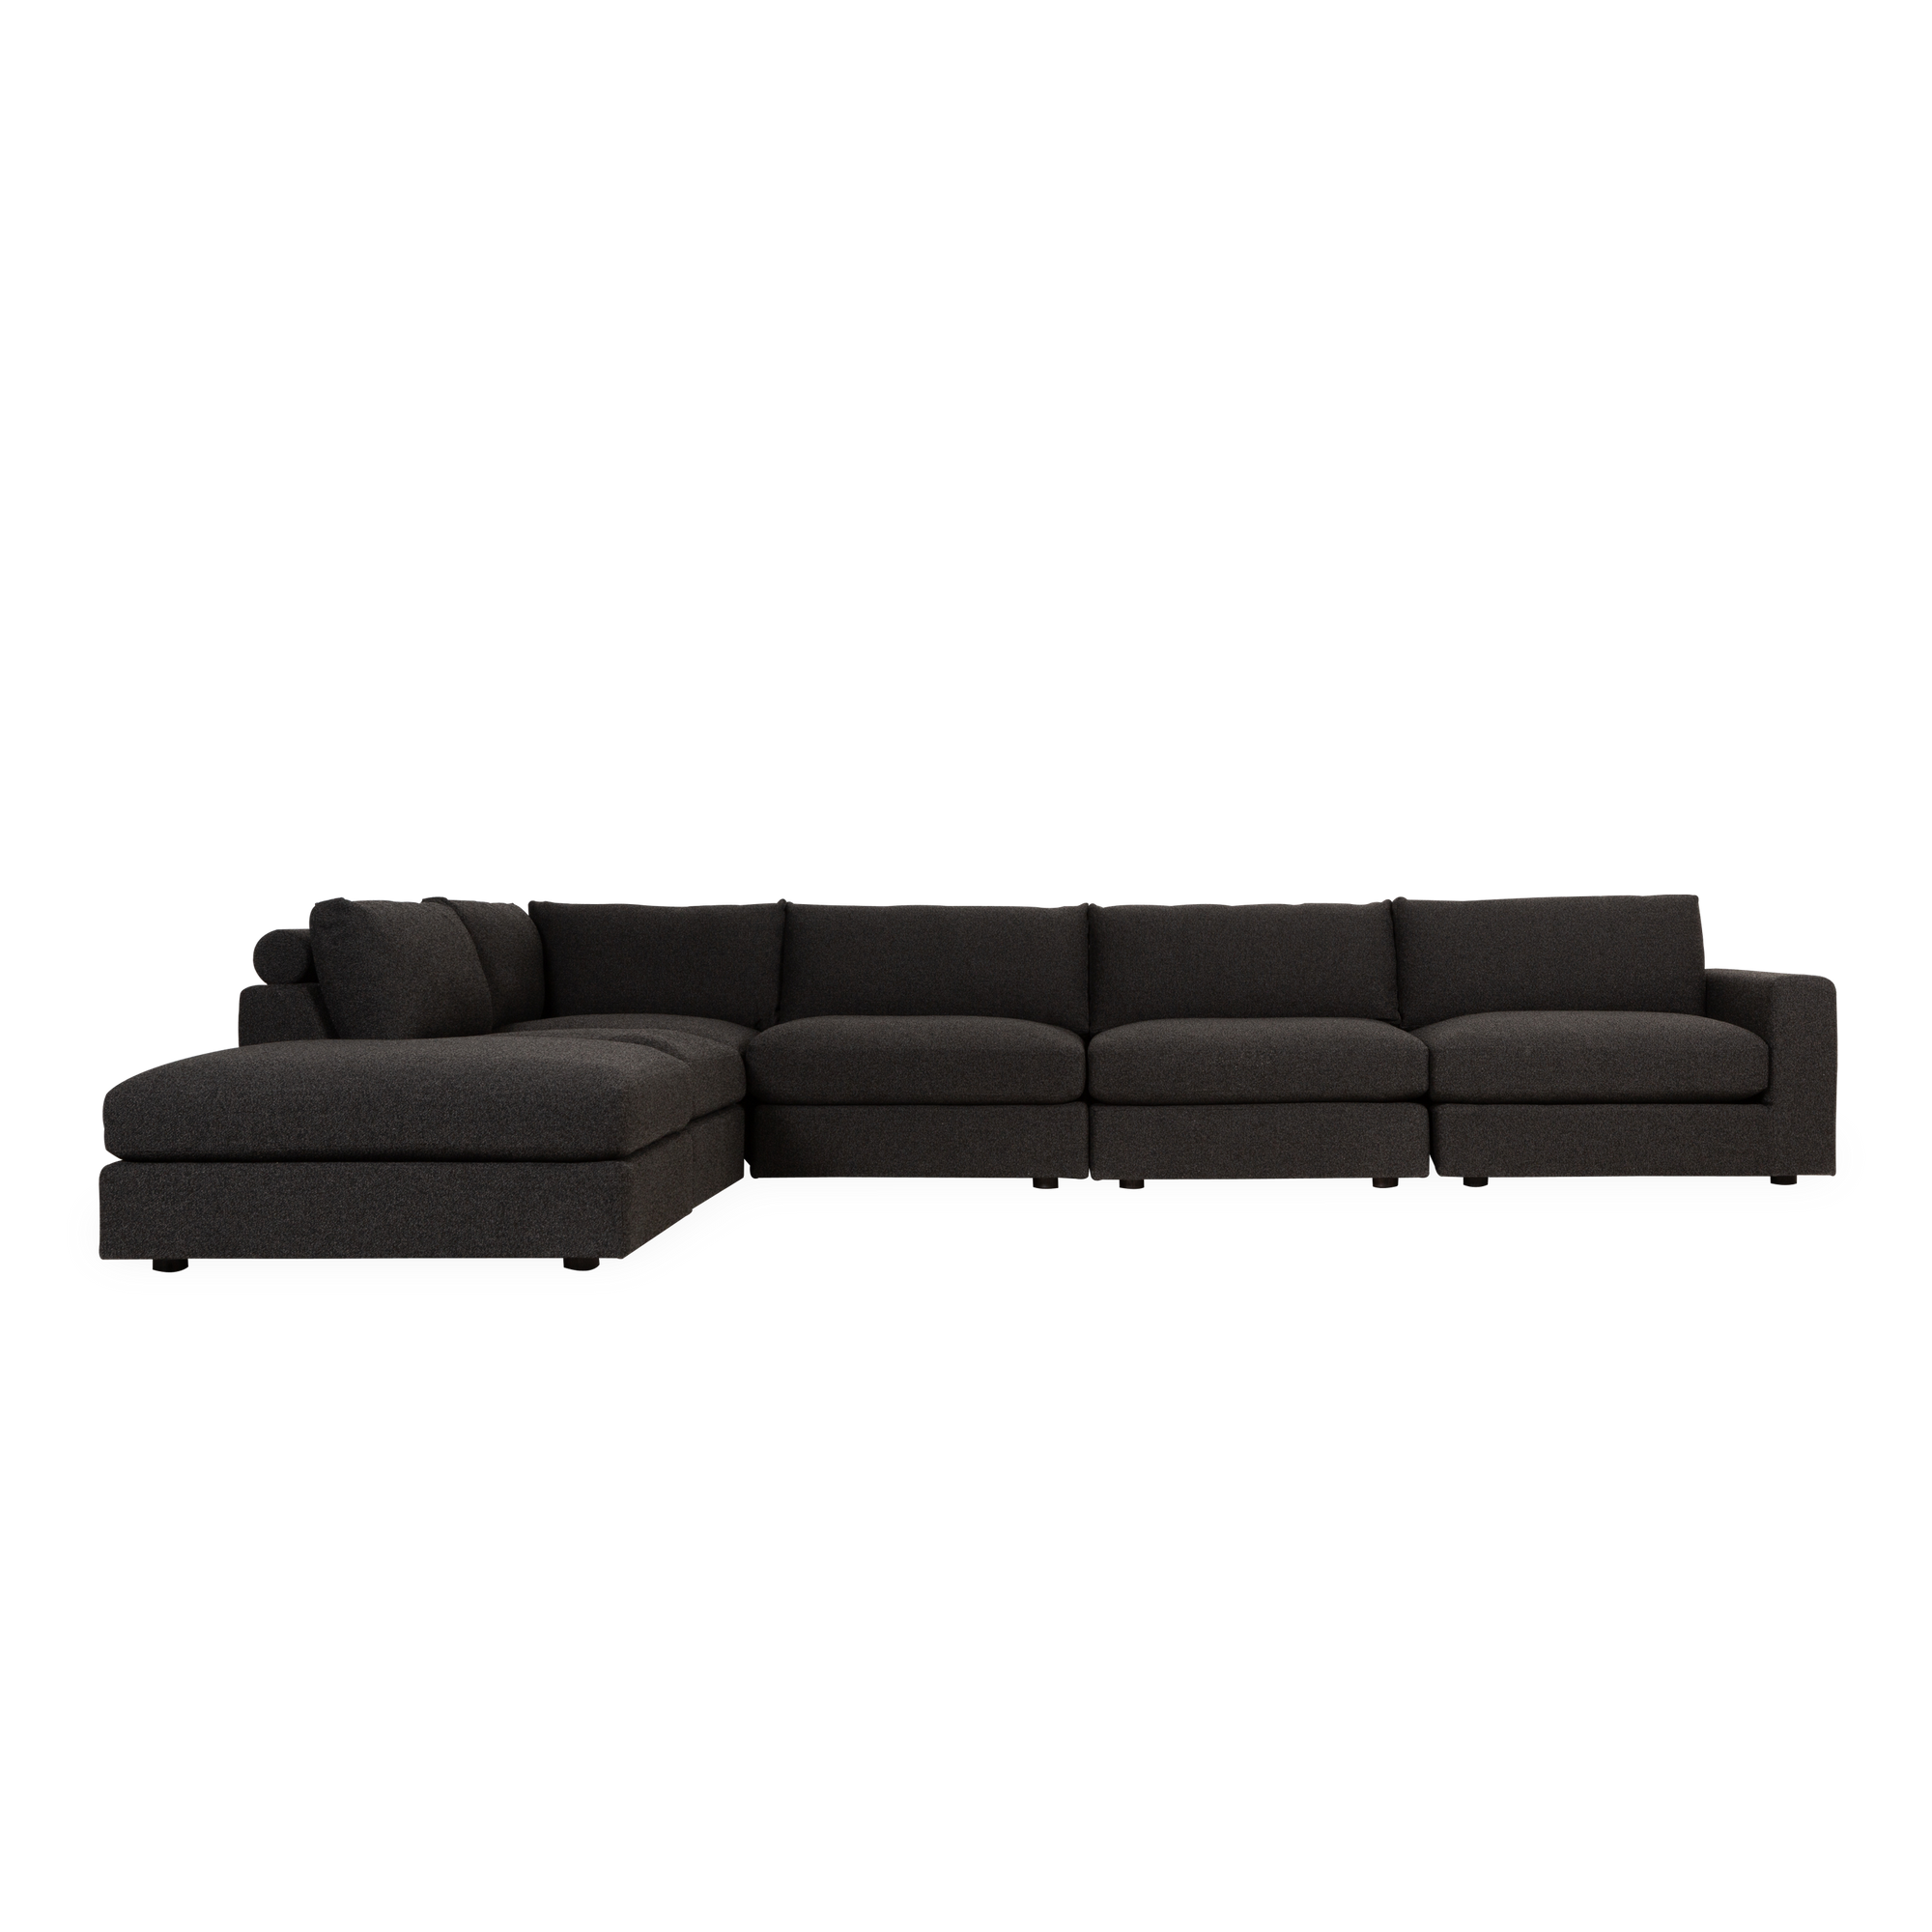 Step into a realm of timeless sophistication with our Colonna Modular Sectional—a tribute to iconic Italian design.